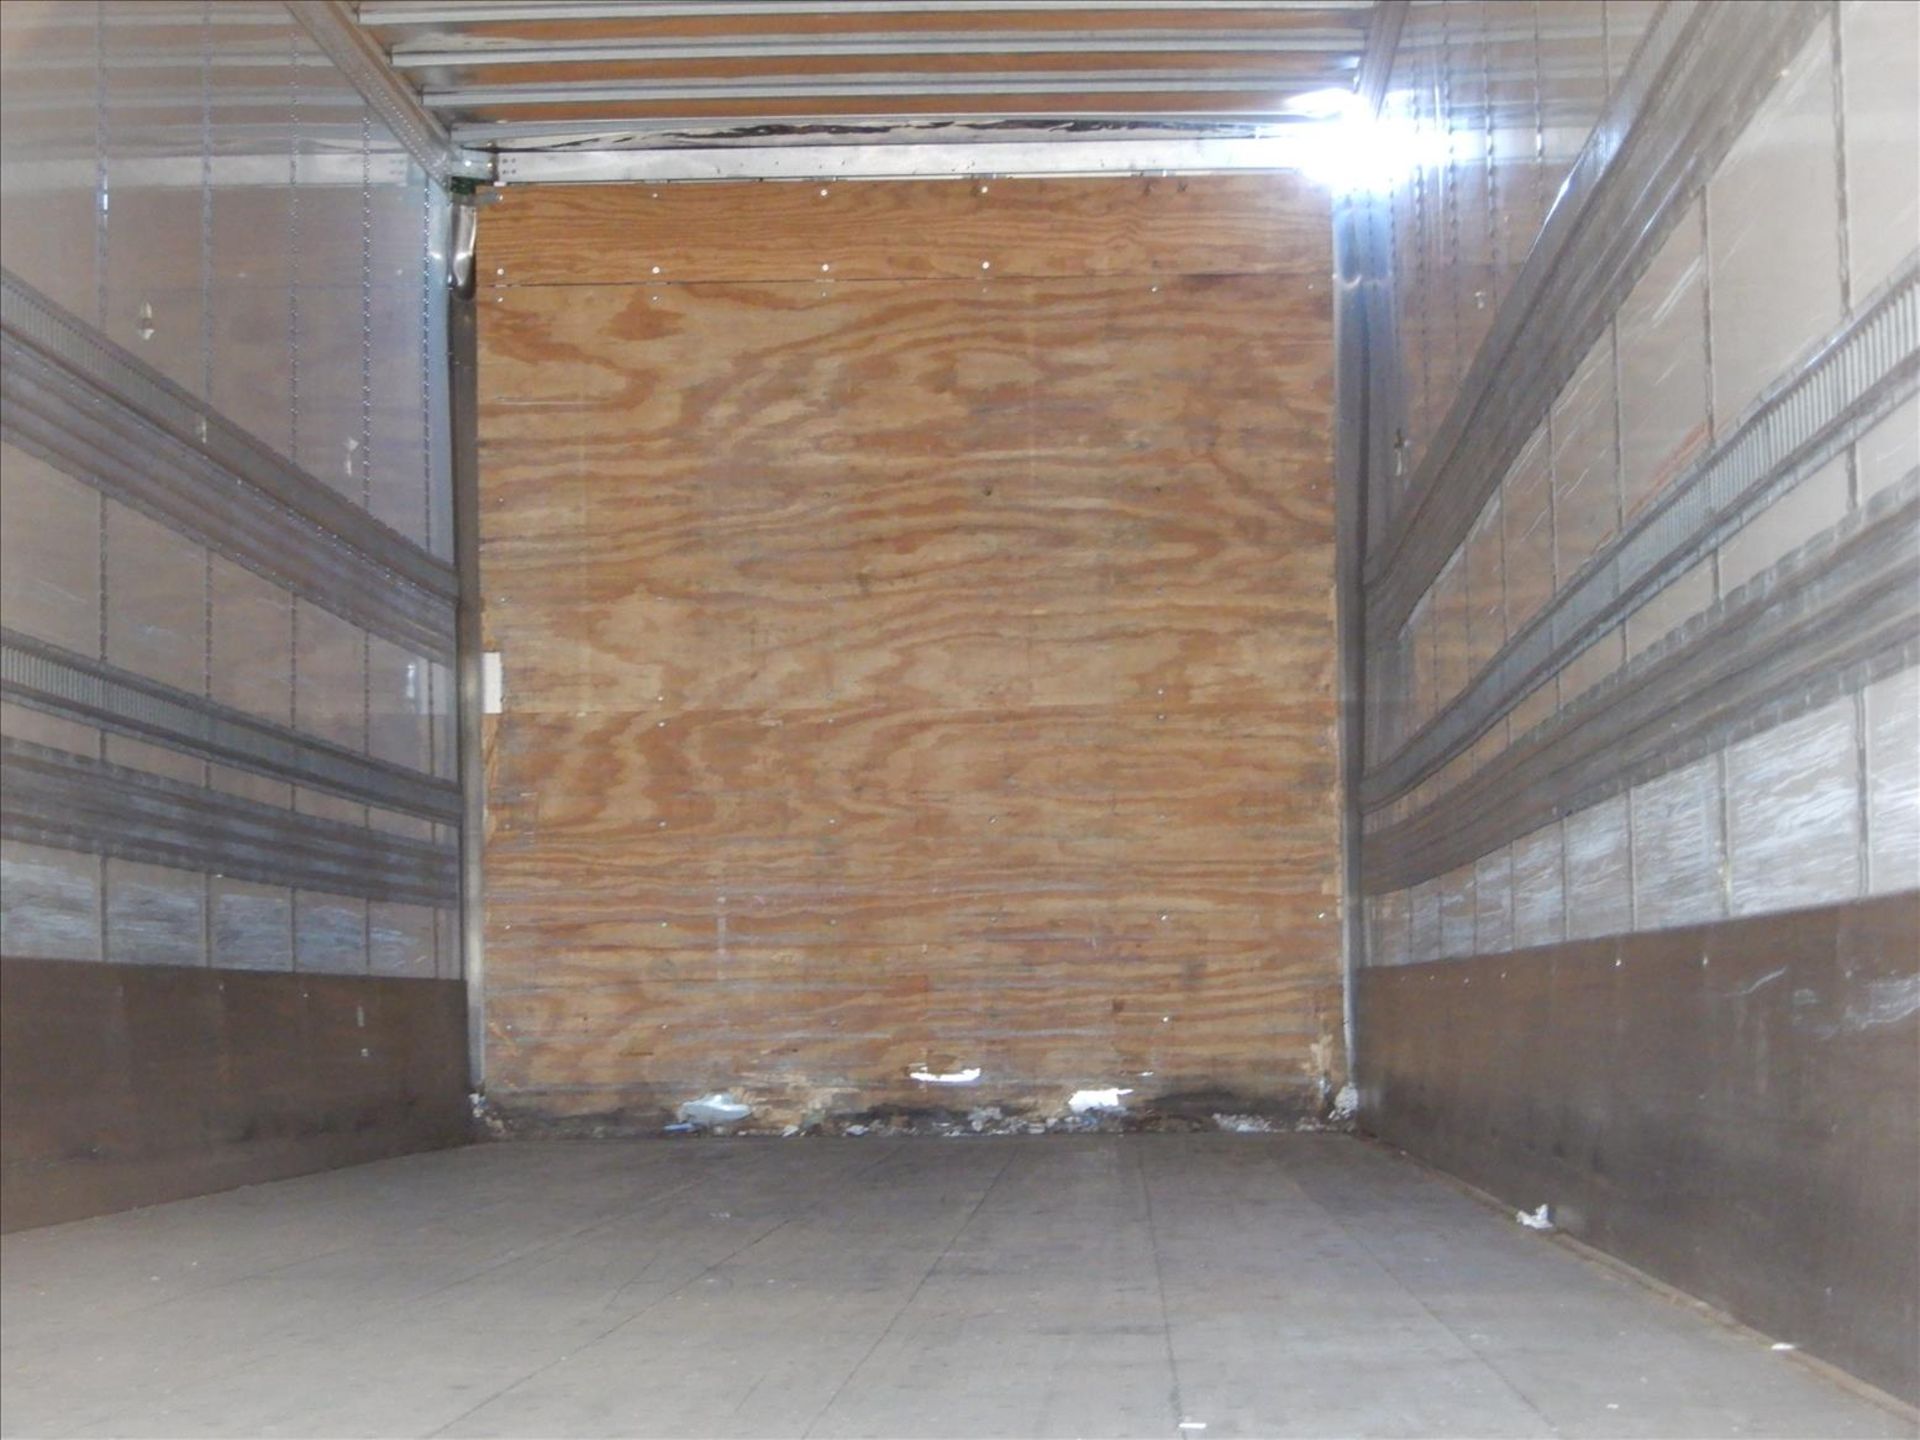 2012 Stoughton Trailer - Located in Indianapolis, IN - Image 26 of 30